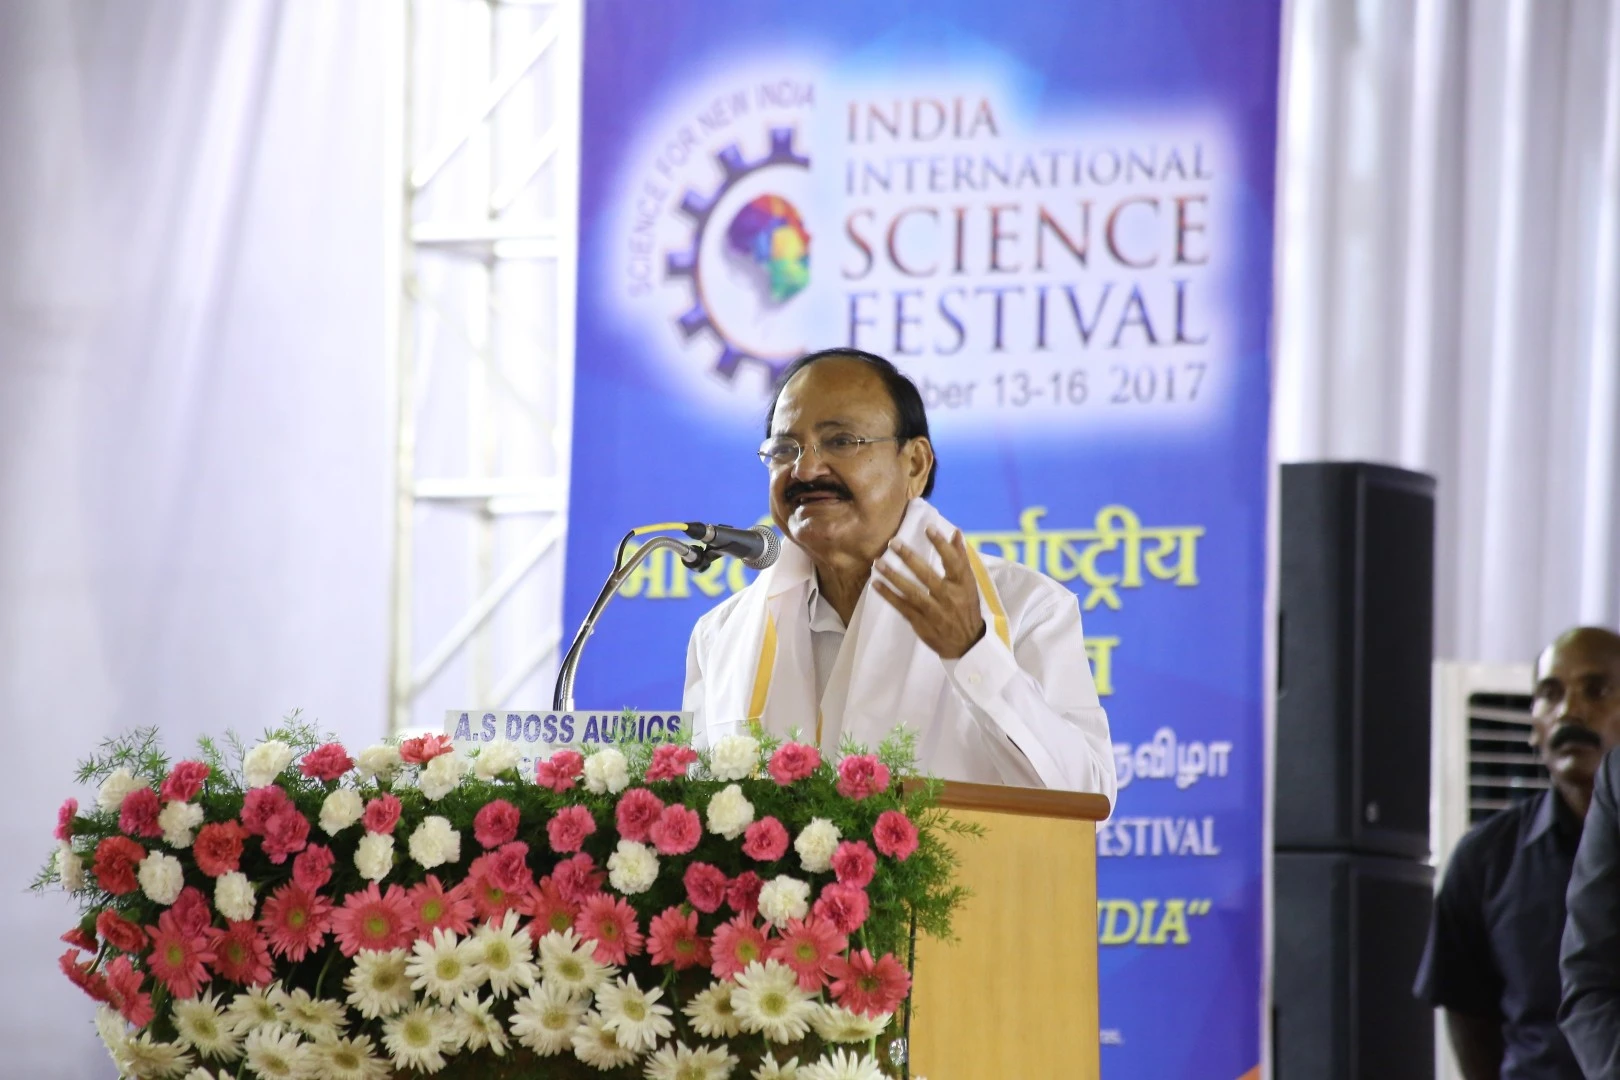 W2S Solutions proudly announces the launch of mobile app for India International Science Festival 2017